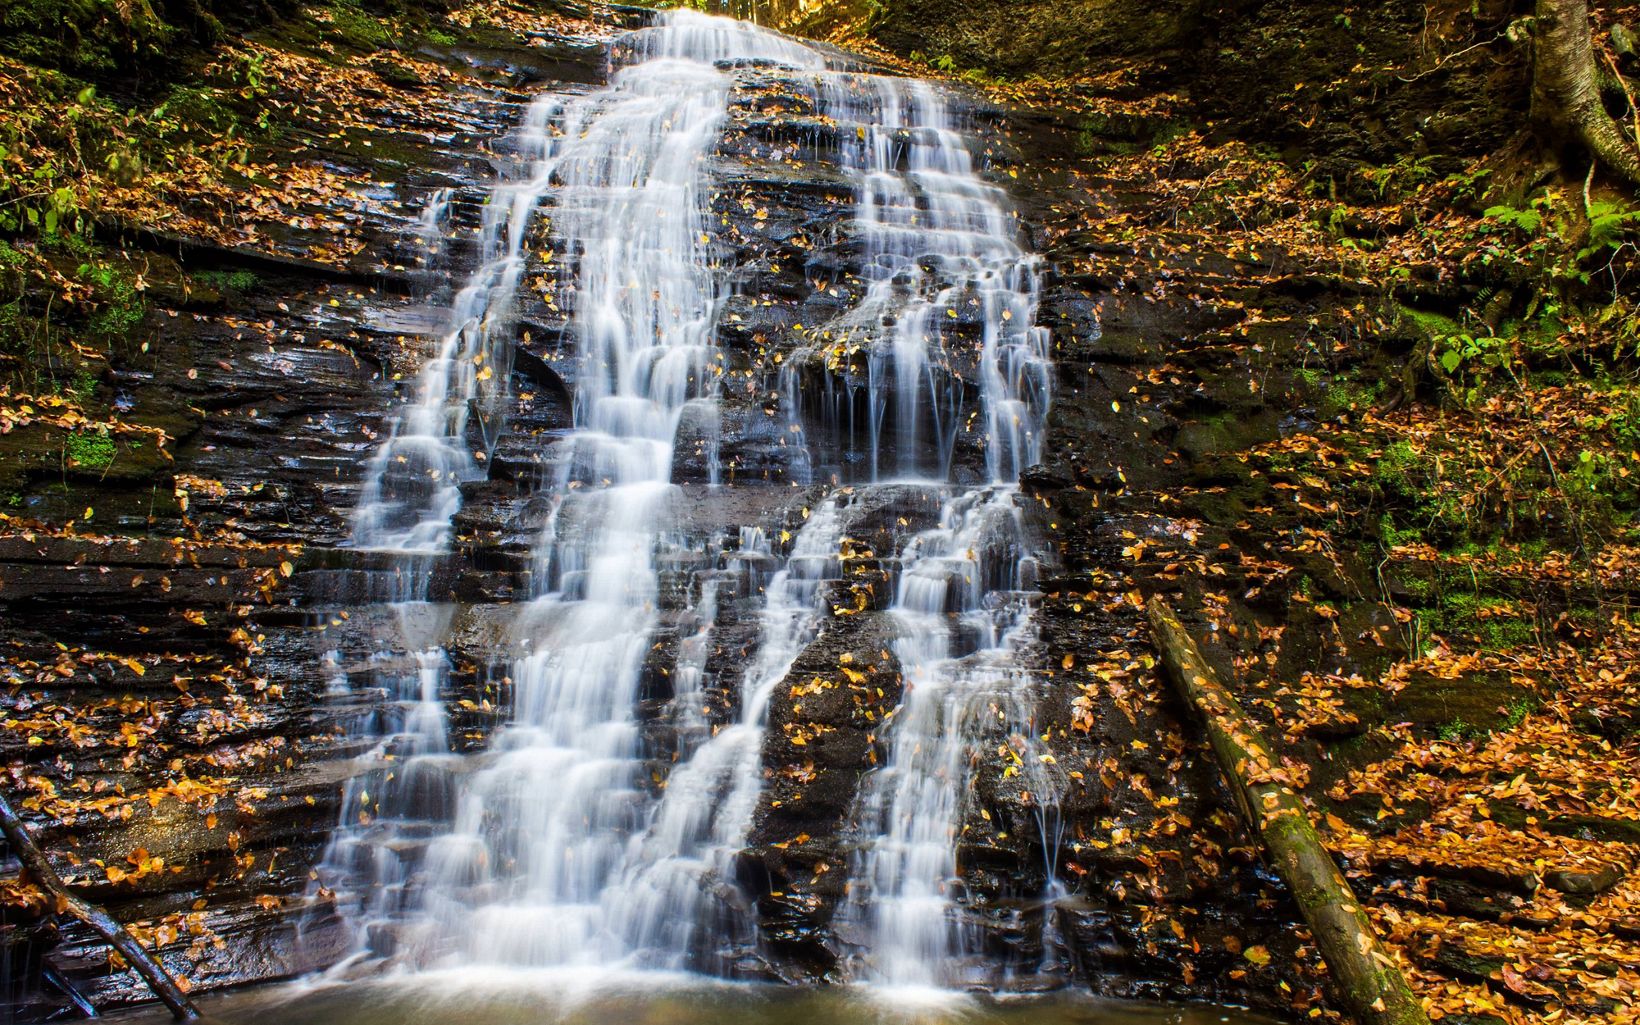 Fall view of waterfall with orange leaves on surrounding rocks.